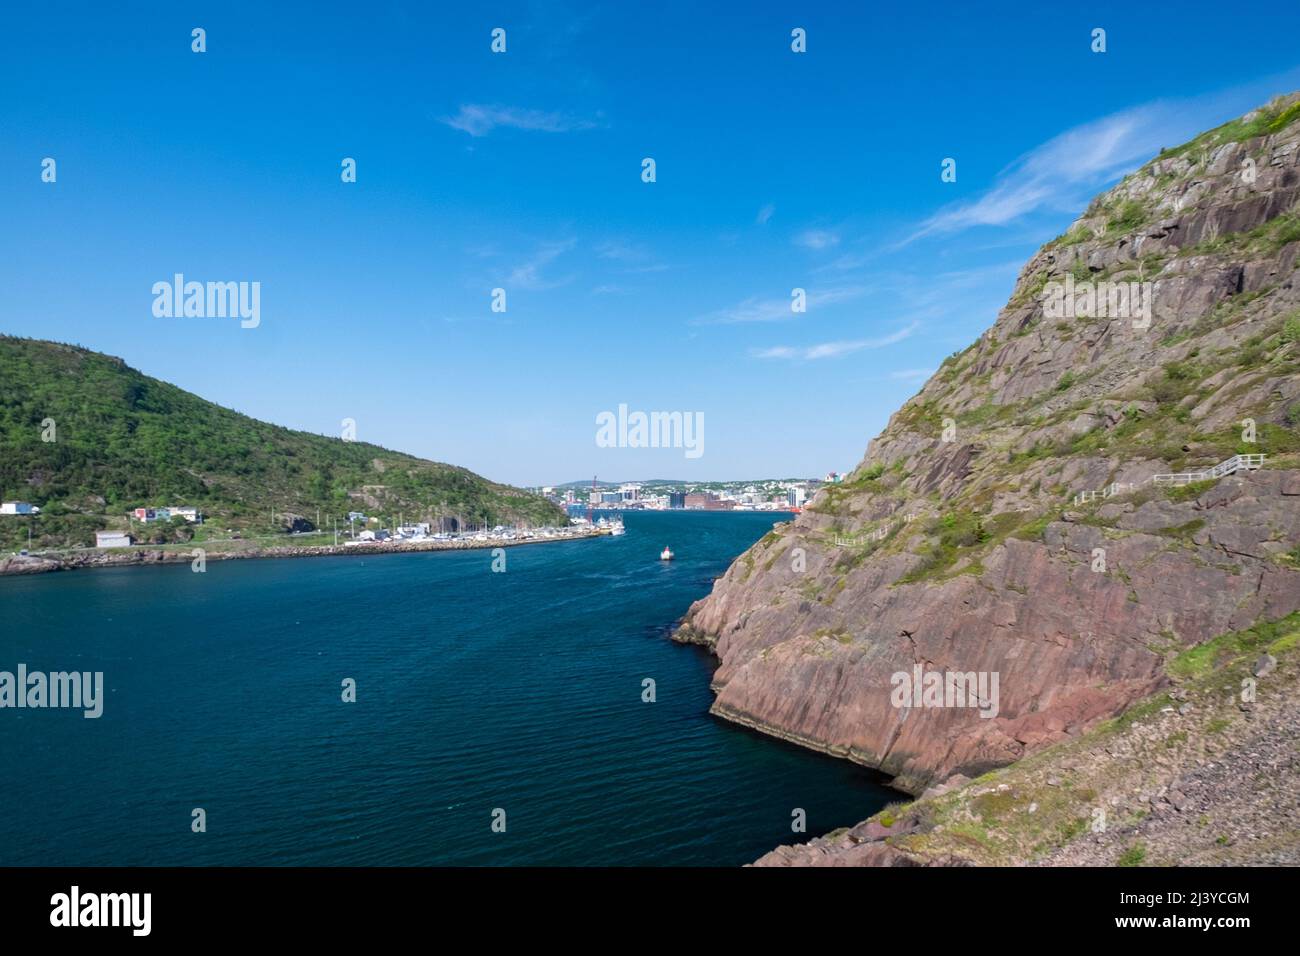 A footpath, Signal Hill hiking trail, or path in St. John's along a hillside. The cliff is rocky with grass patches. The ocean is blue in the harbor. Stock Photo